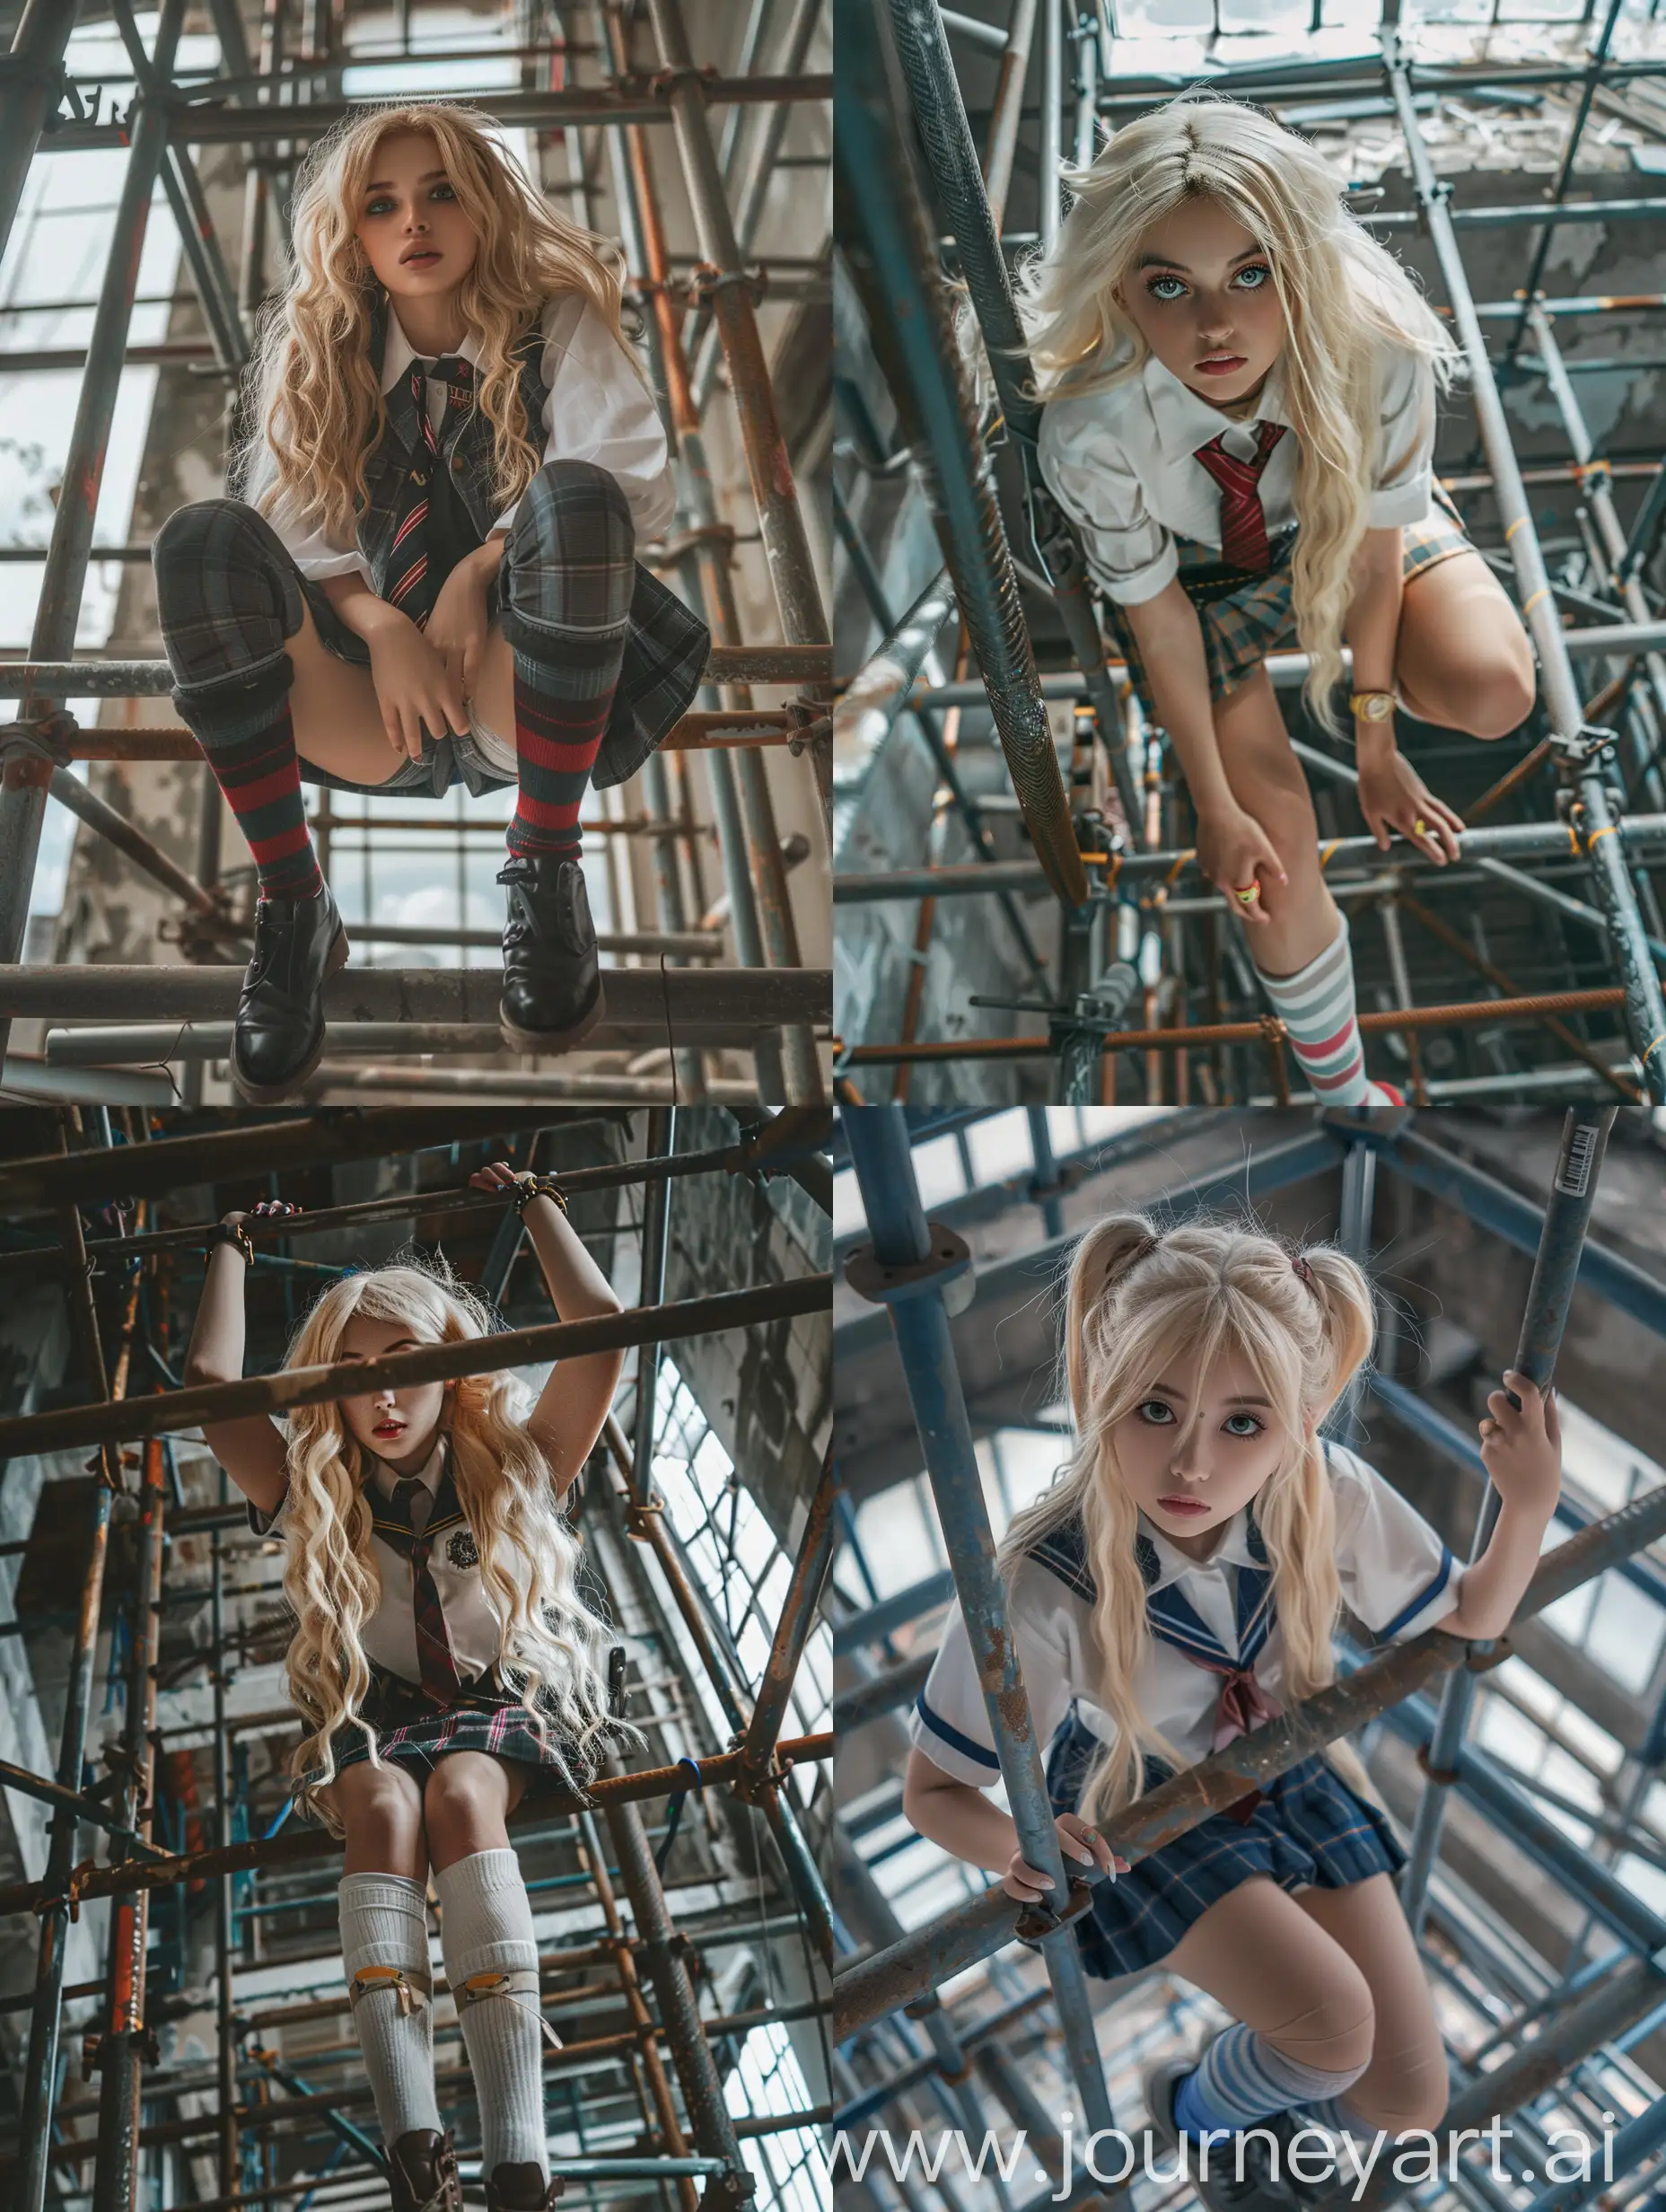 1 girl, long blond hair, 18 years old, influencer, beauty,   school uniform, makeup, down view, , down view, socks and boots, 4k, , is working on a steel scaffold under construction